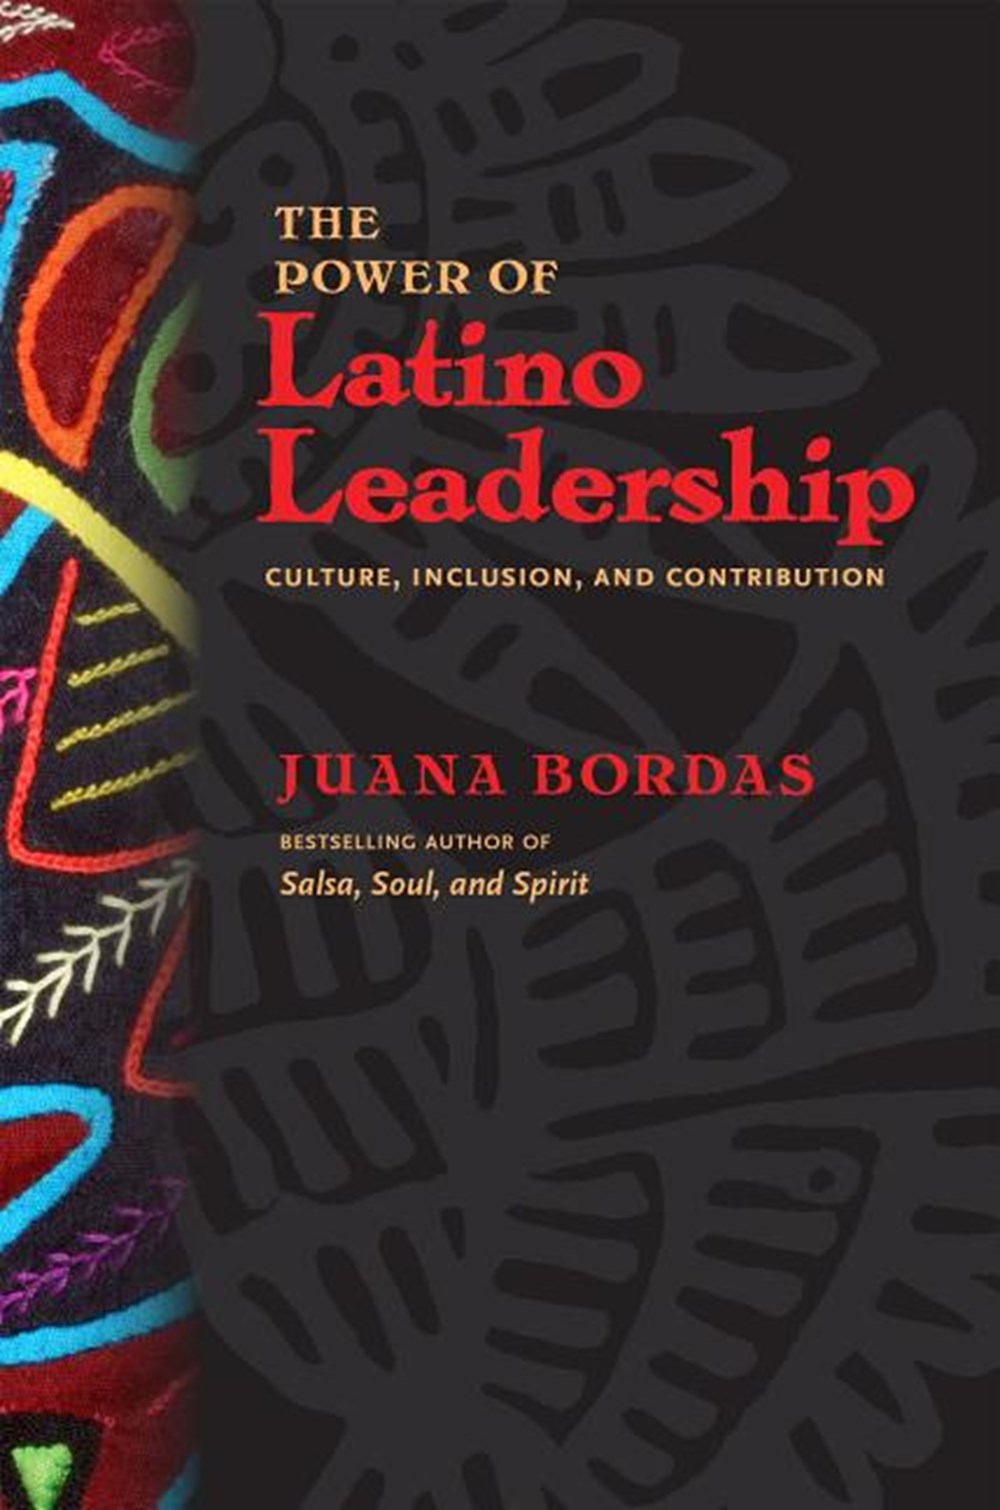 Power of Latino Leadership: Culture, Inclusion, and Contribution